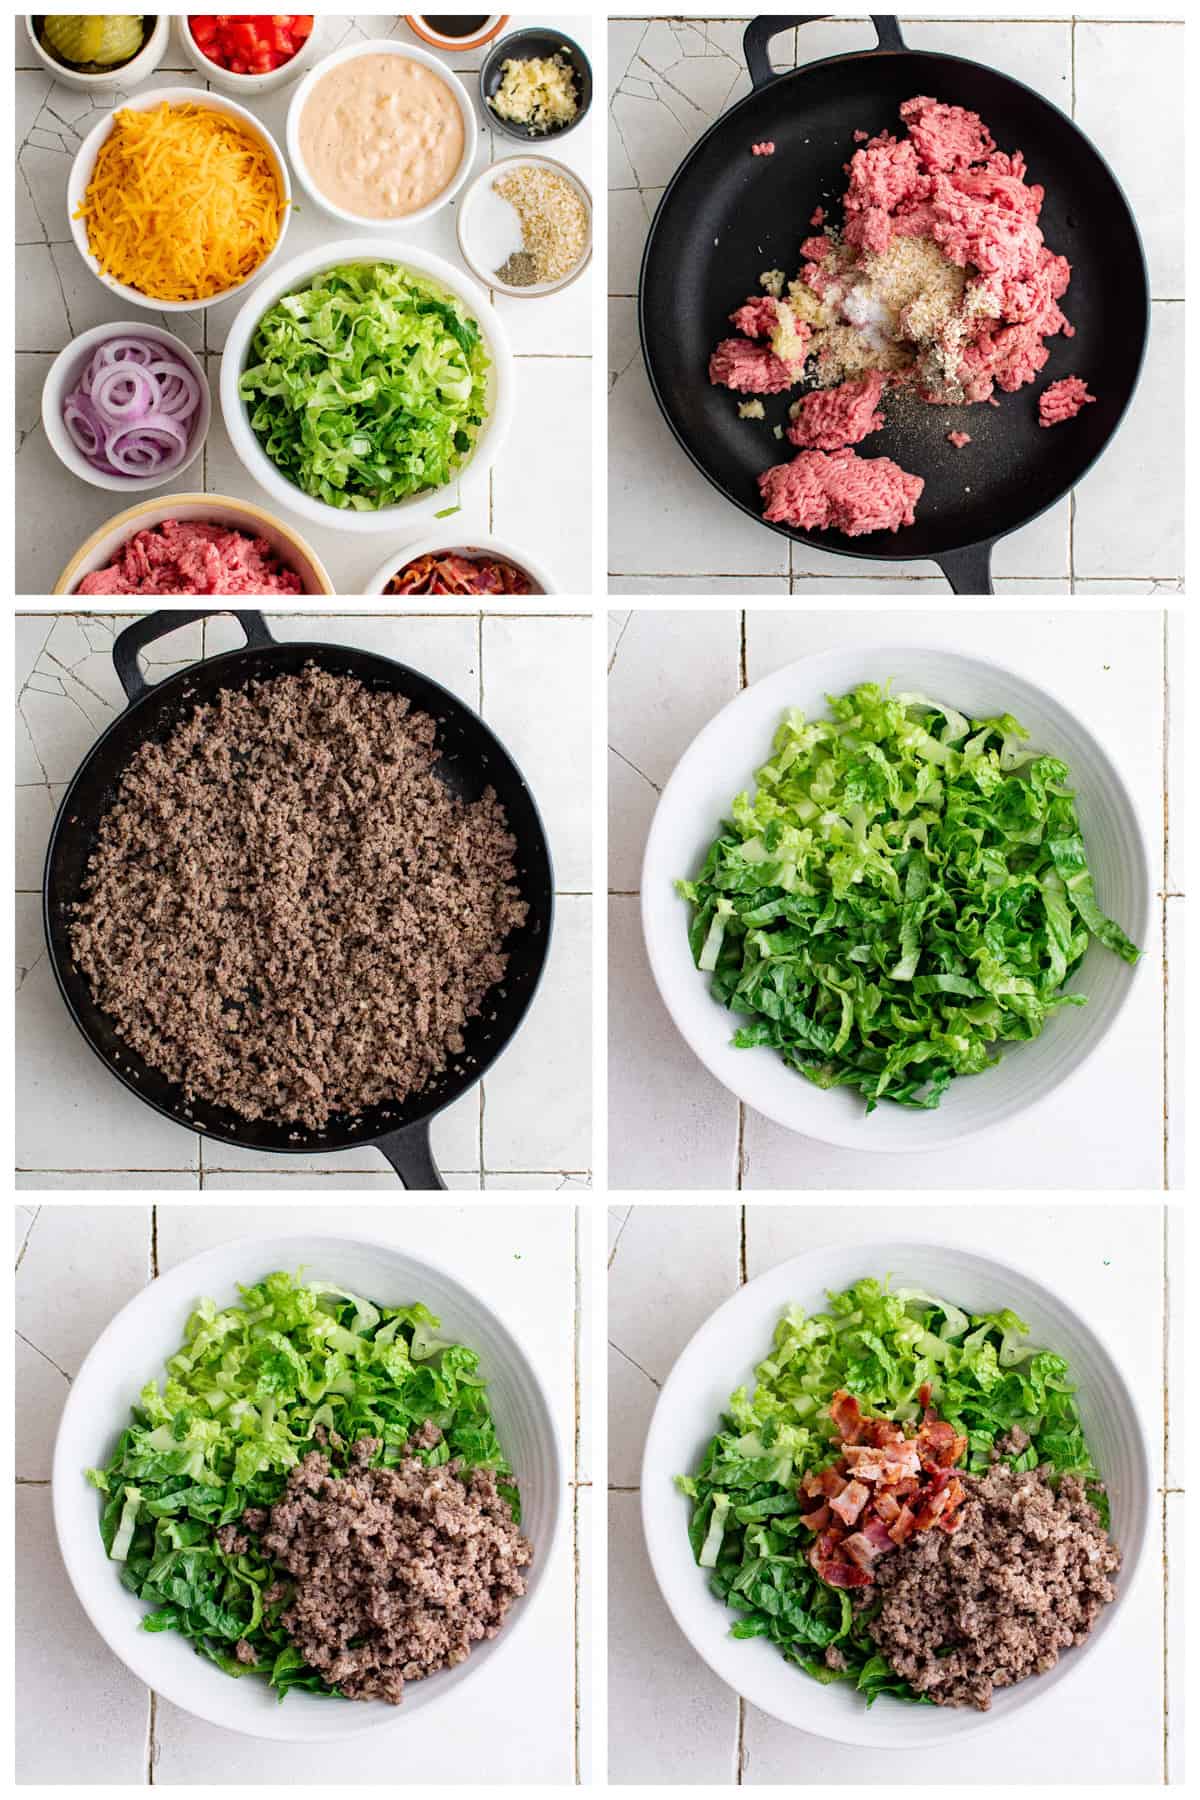 Step by Step Directions to make low carb Bacon Cheeseburger Salads